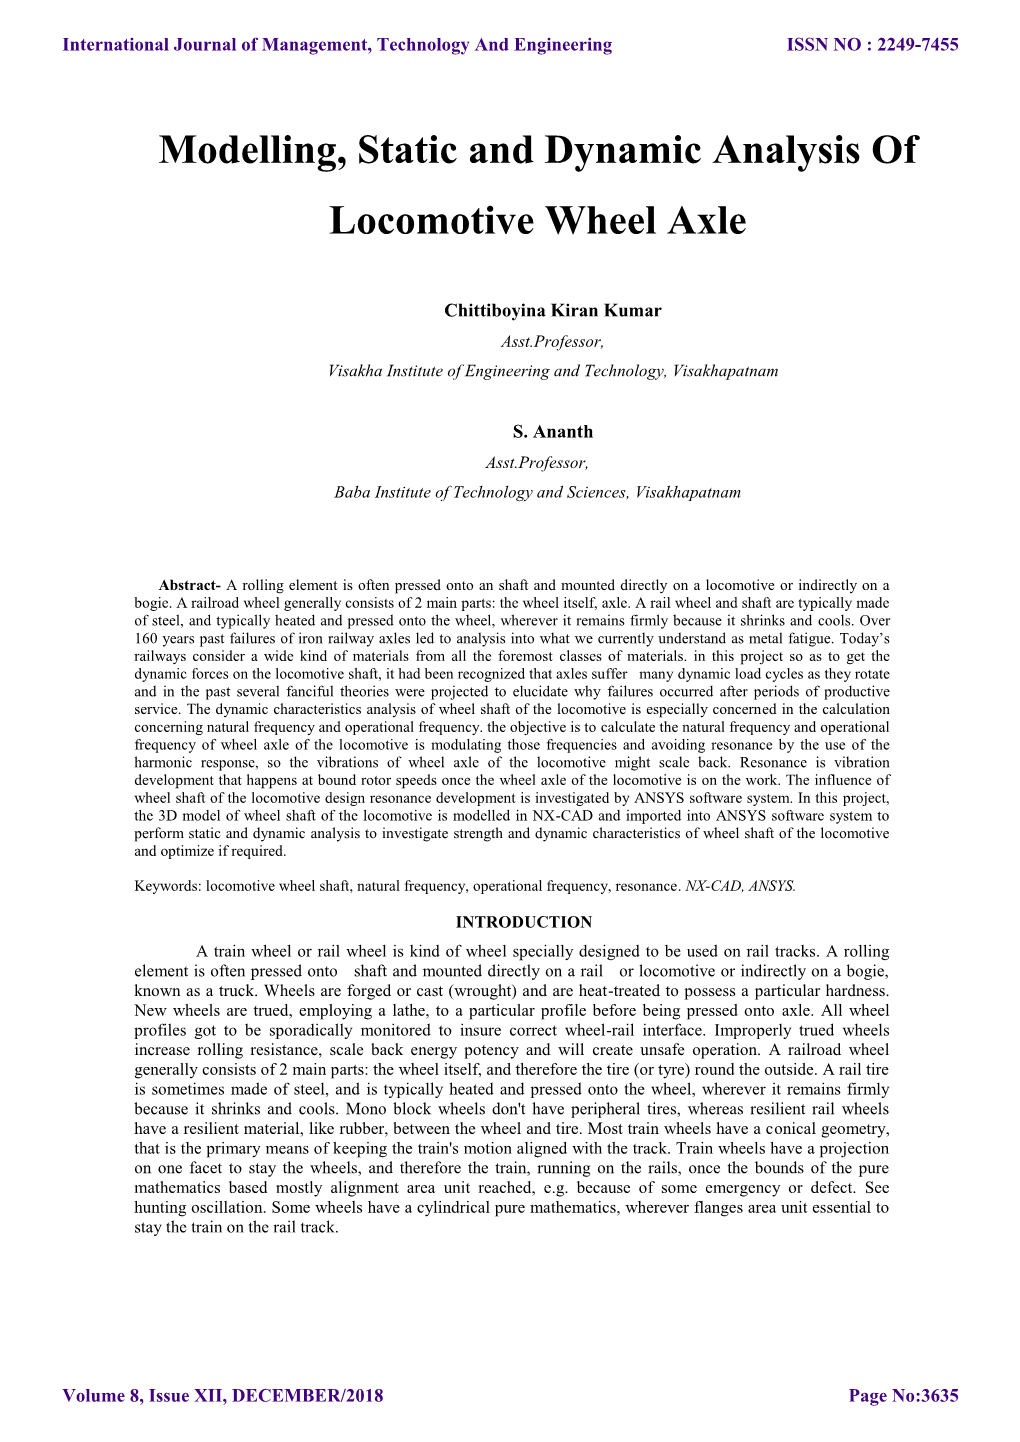 Modelling, Static and Dynamic Analysis of Locomotive Wheel Axle